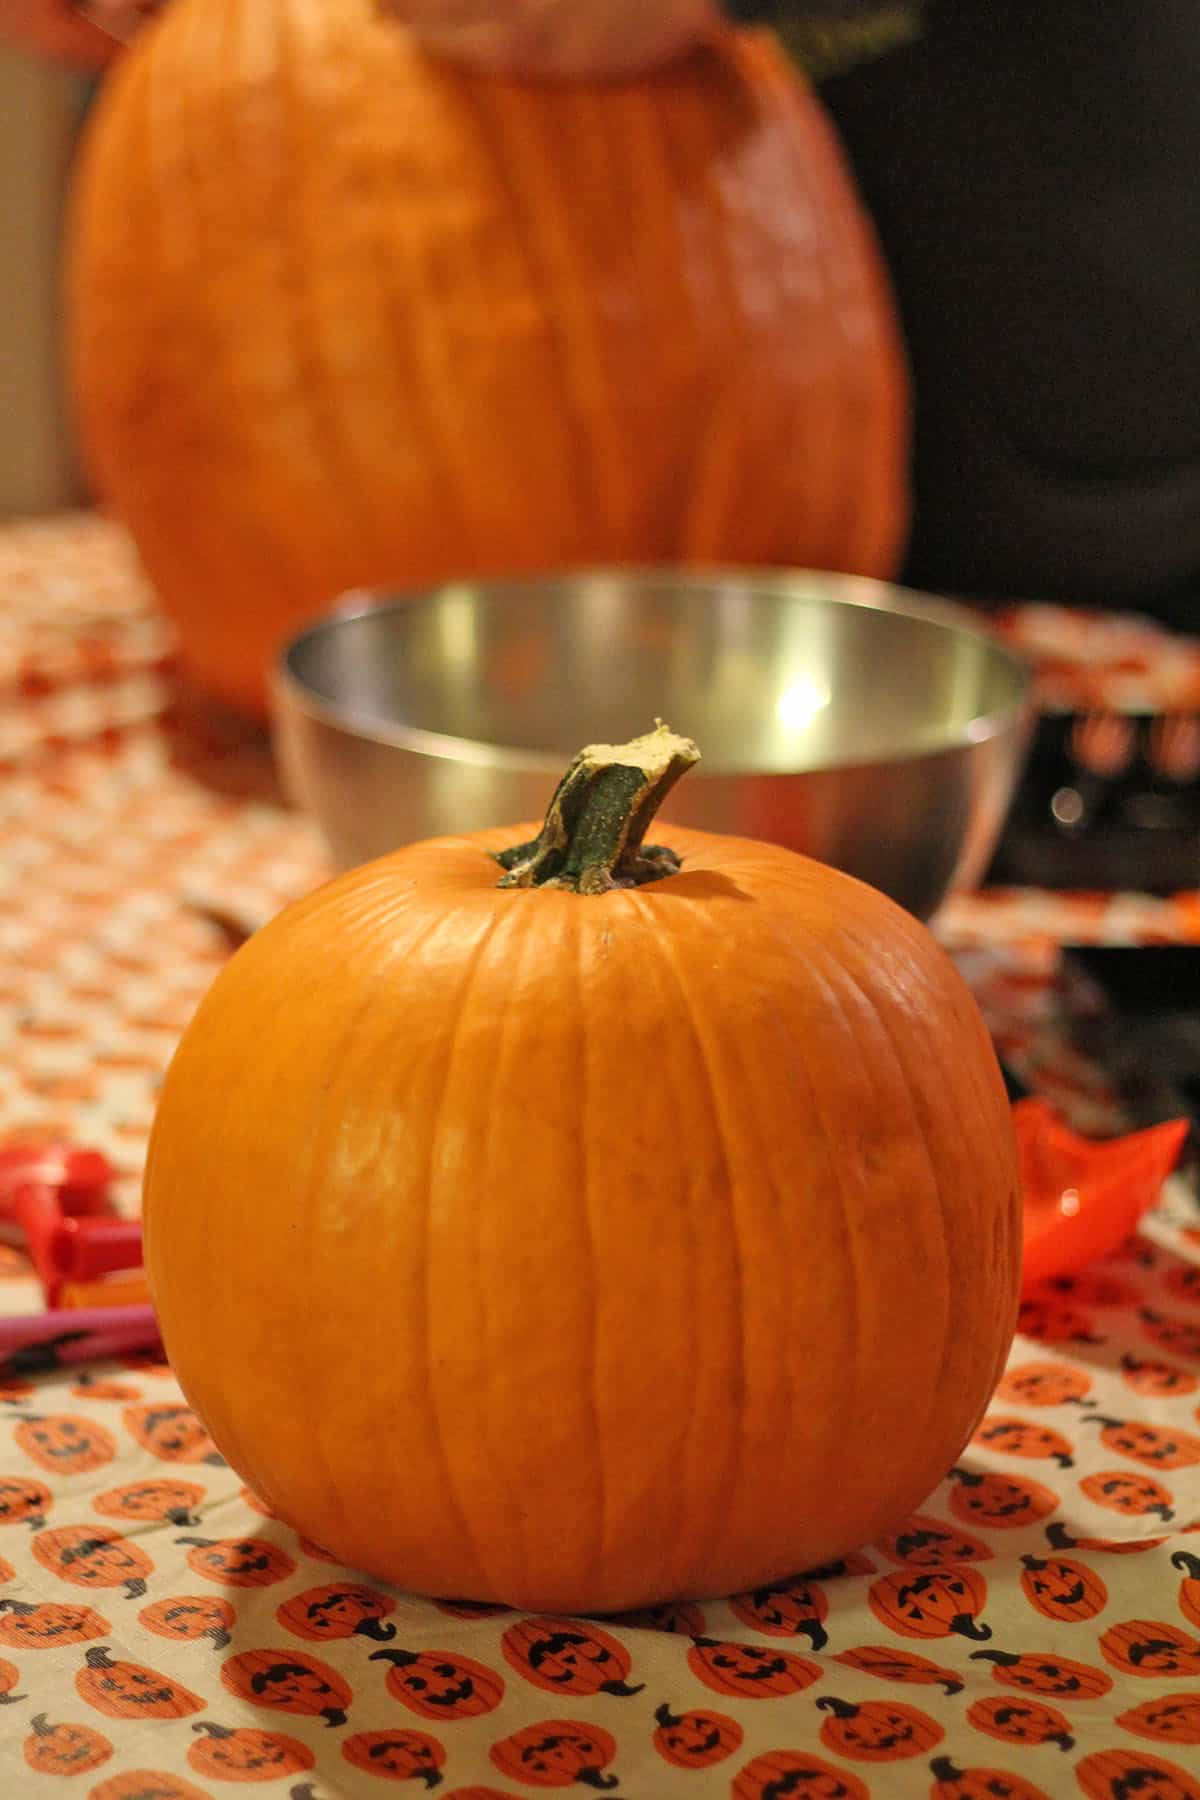 Pumpkin on table by metal bowl.